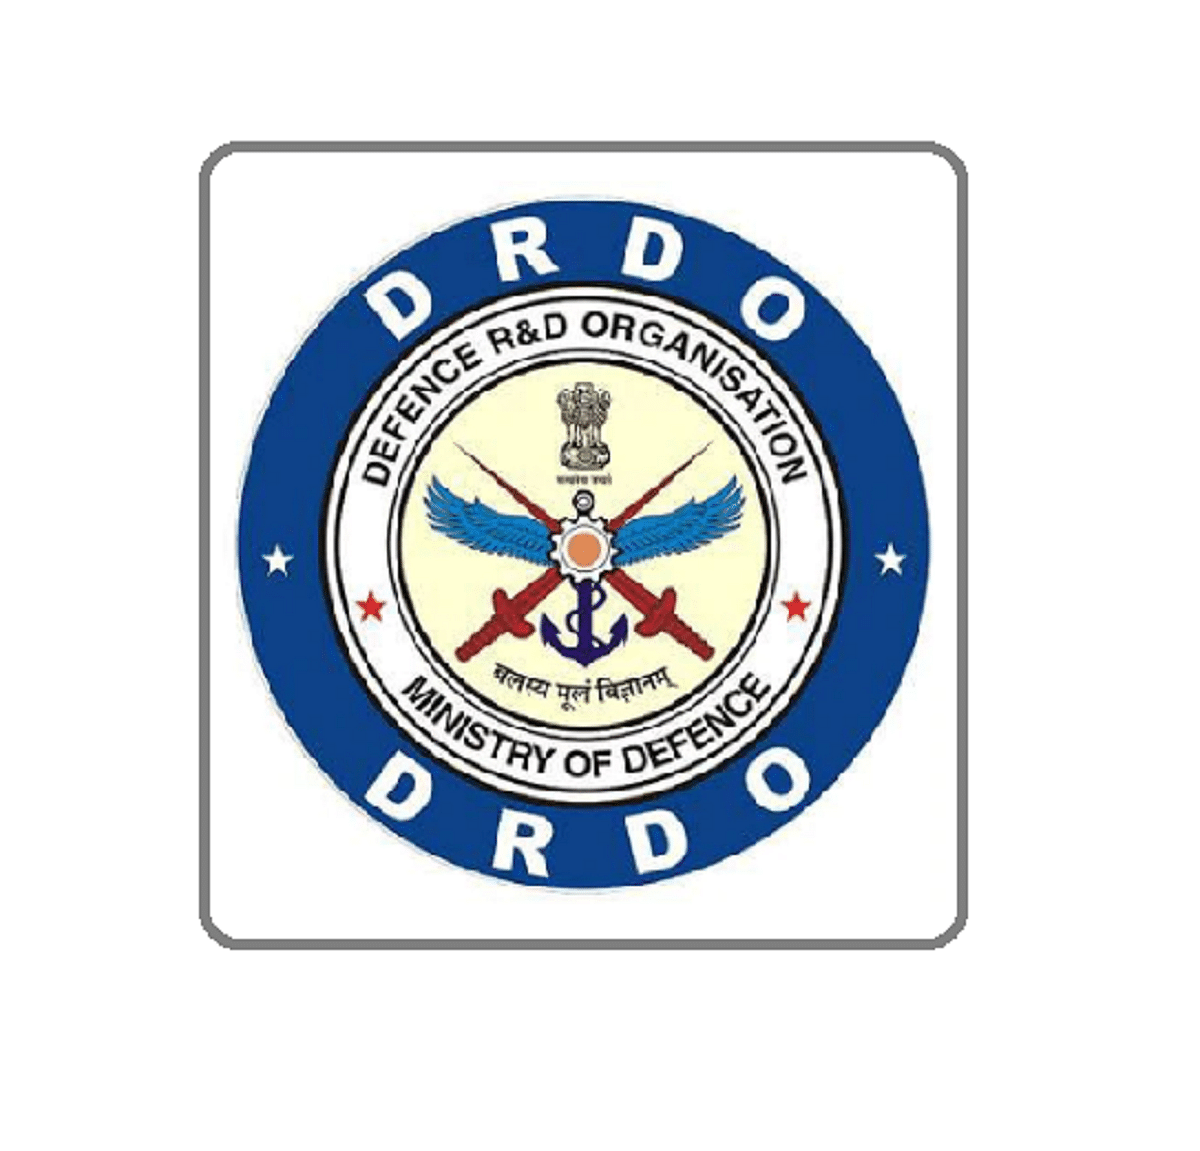 DRDO Recruitment for 290 Scientist, Engineer Vacancy Concludes Today, Apply Now